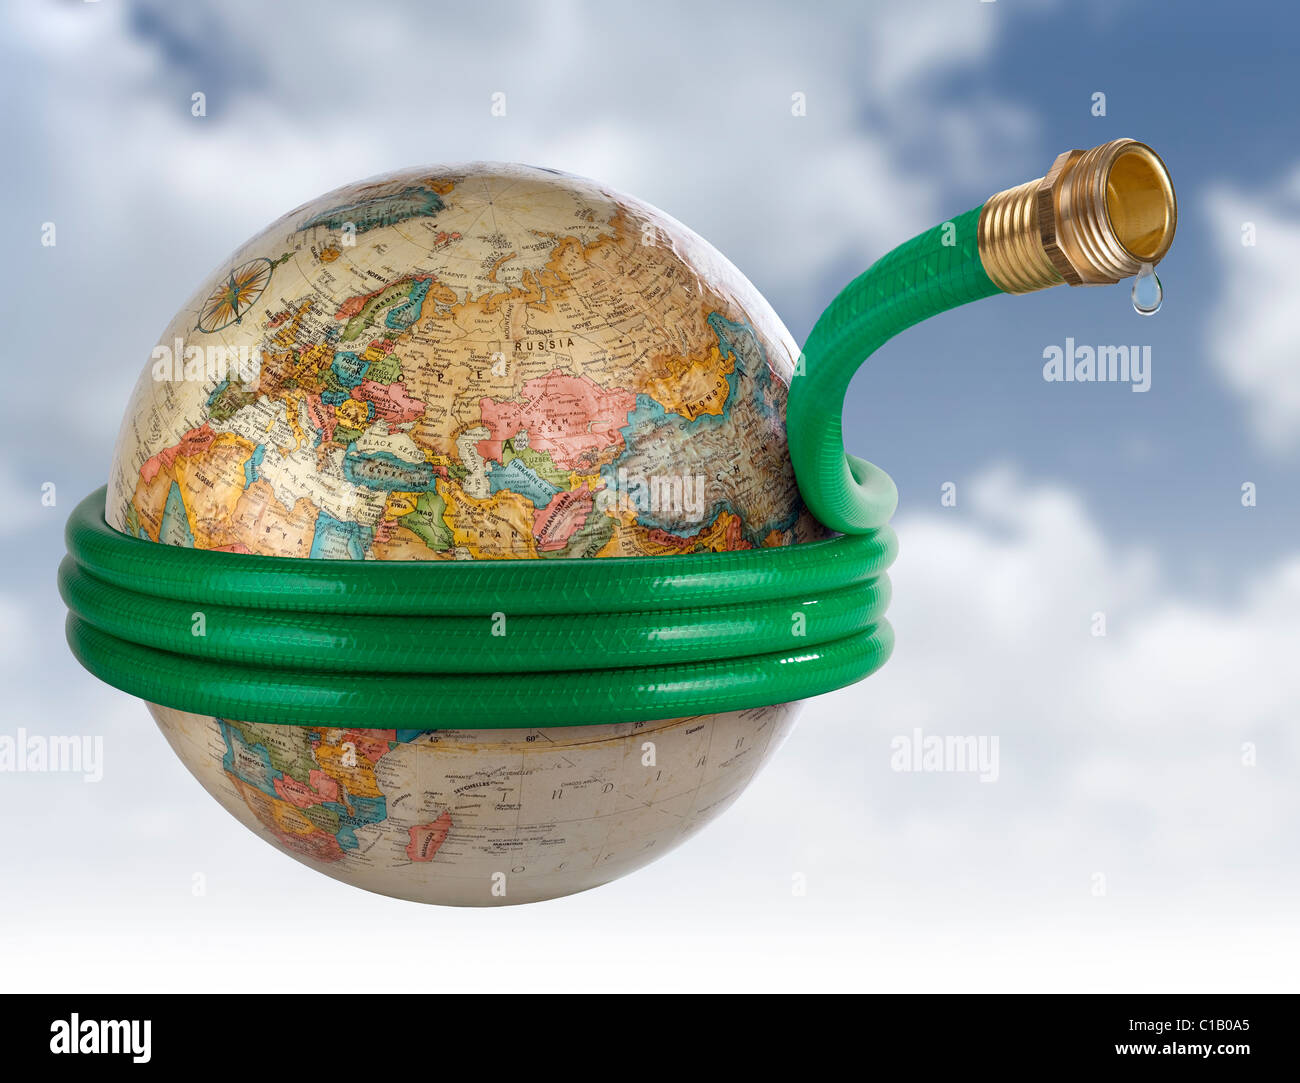 A hose wrapped around a globe in a Global Water Issues concept image. Stock Photo